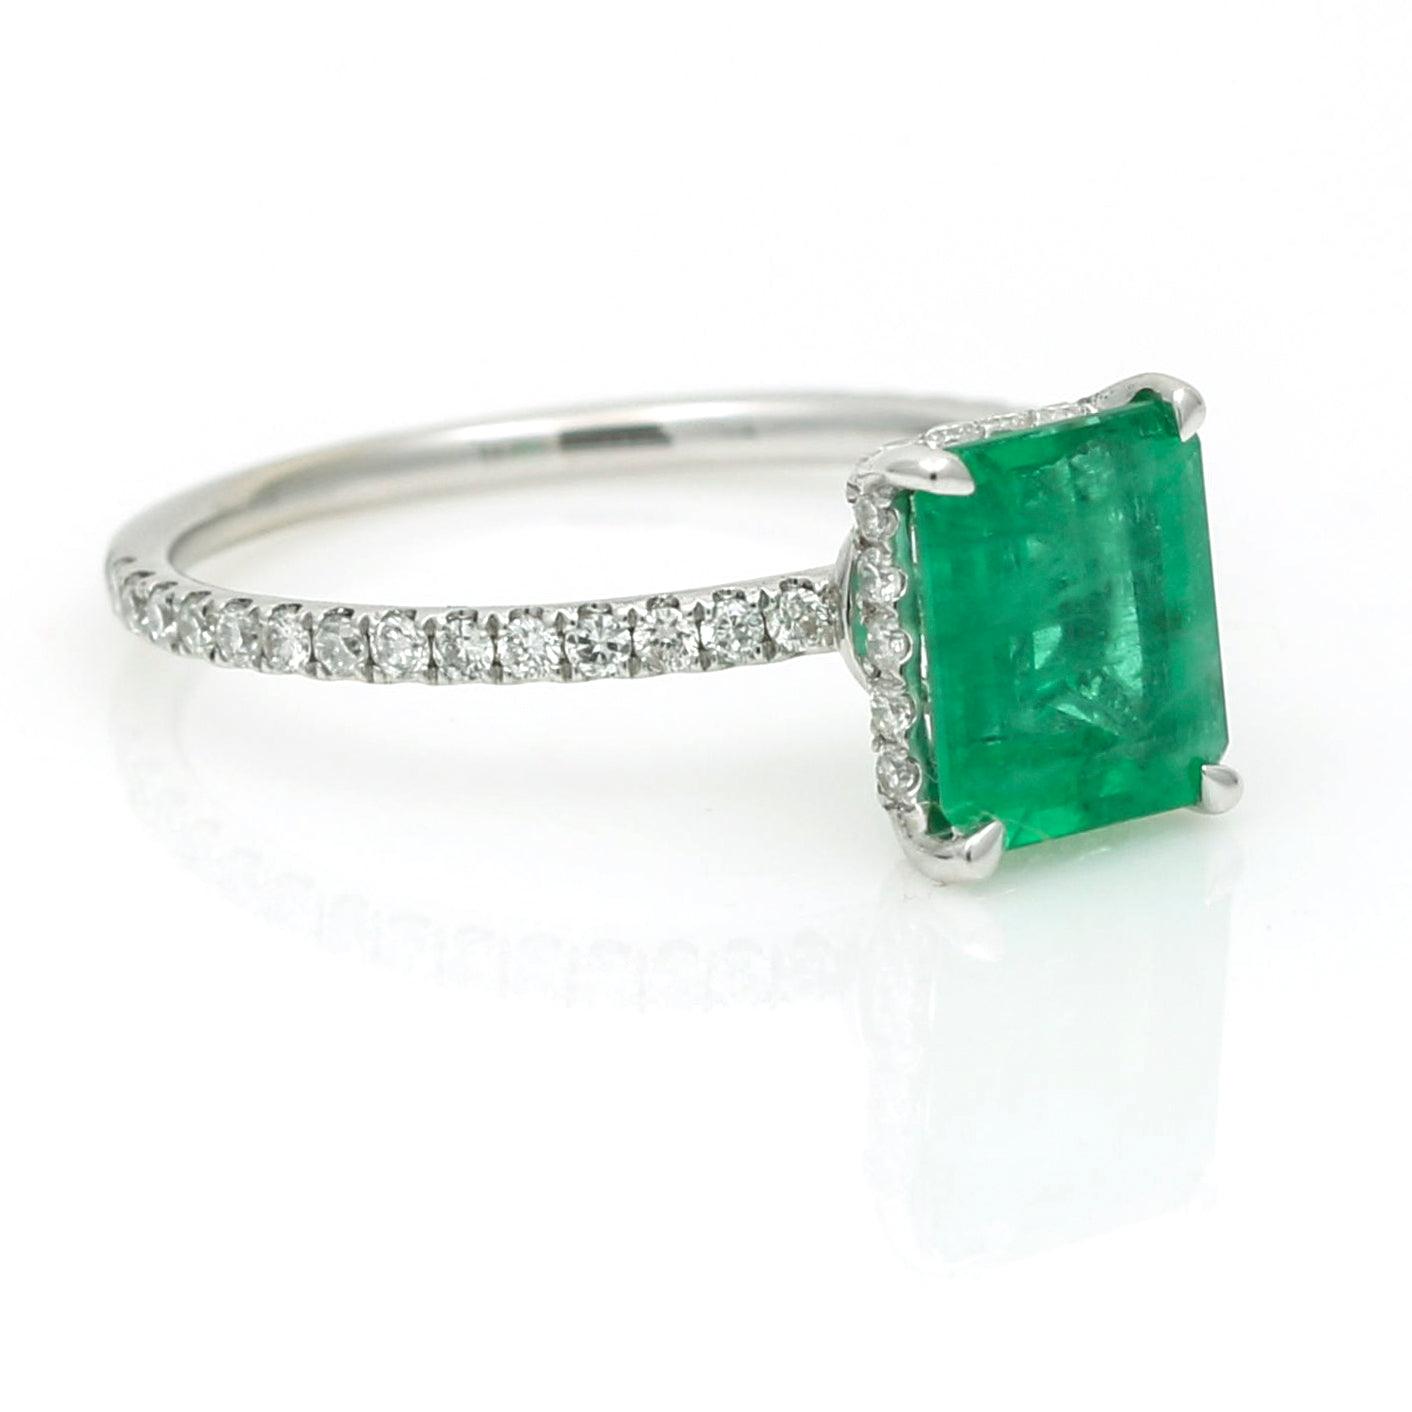 Women's Emerald Diamond Solitaire Ring in 18k White Gold - 31 Jewels Inc.